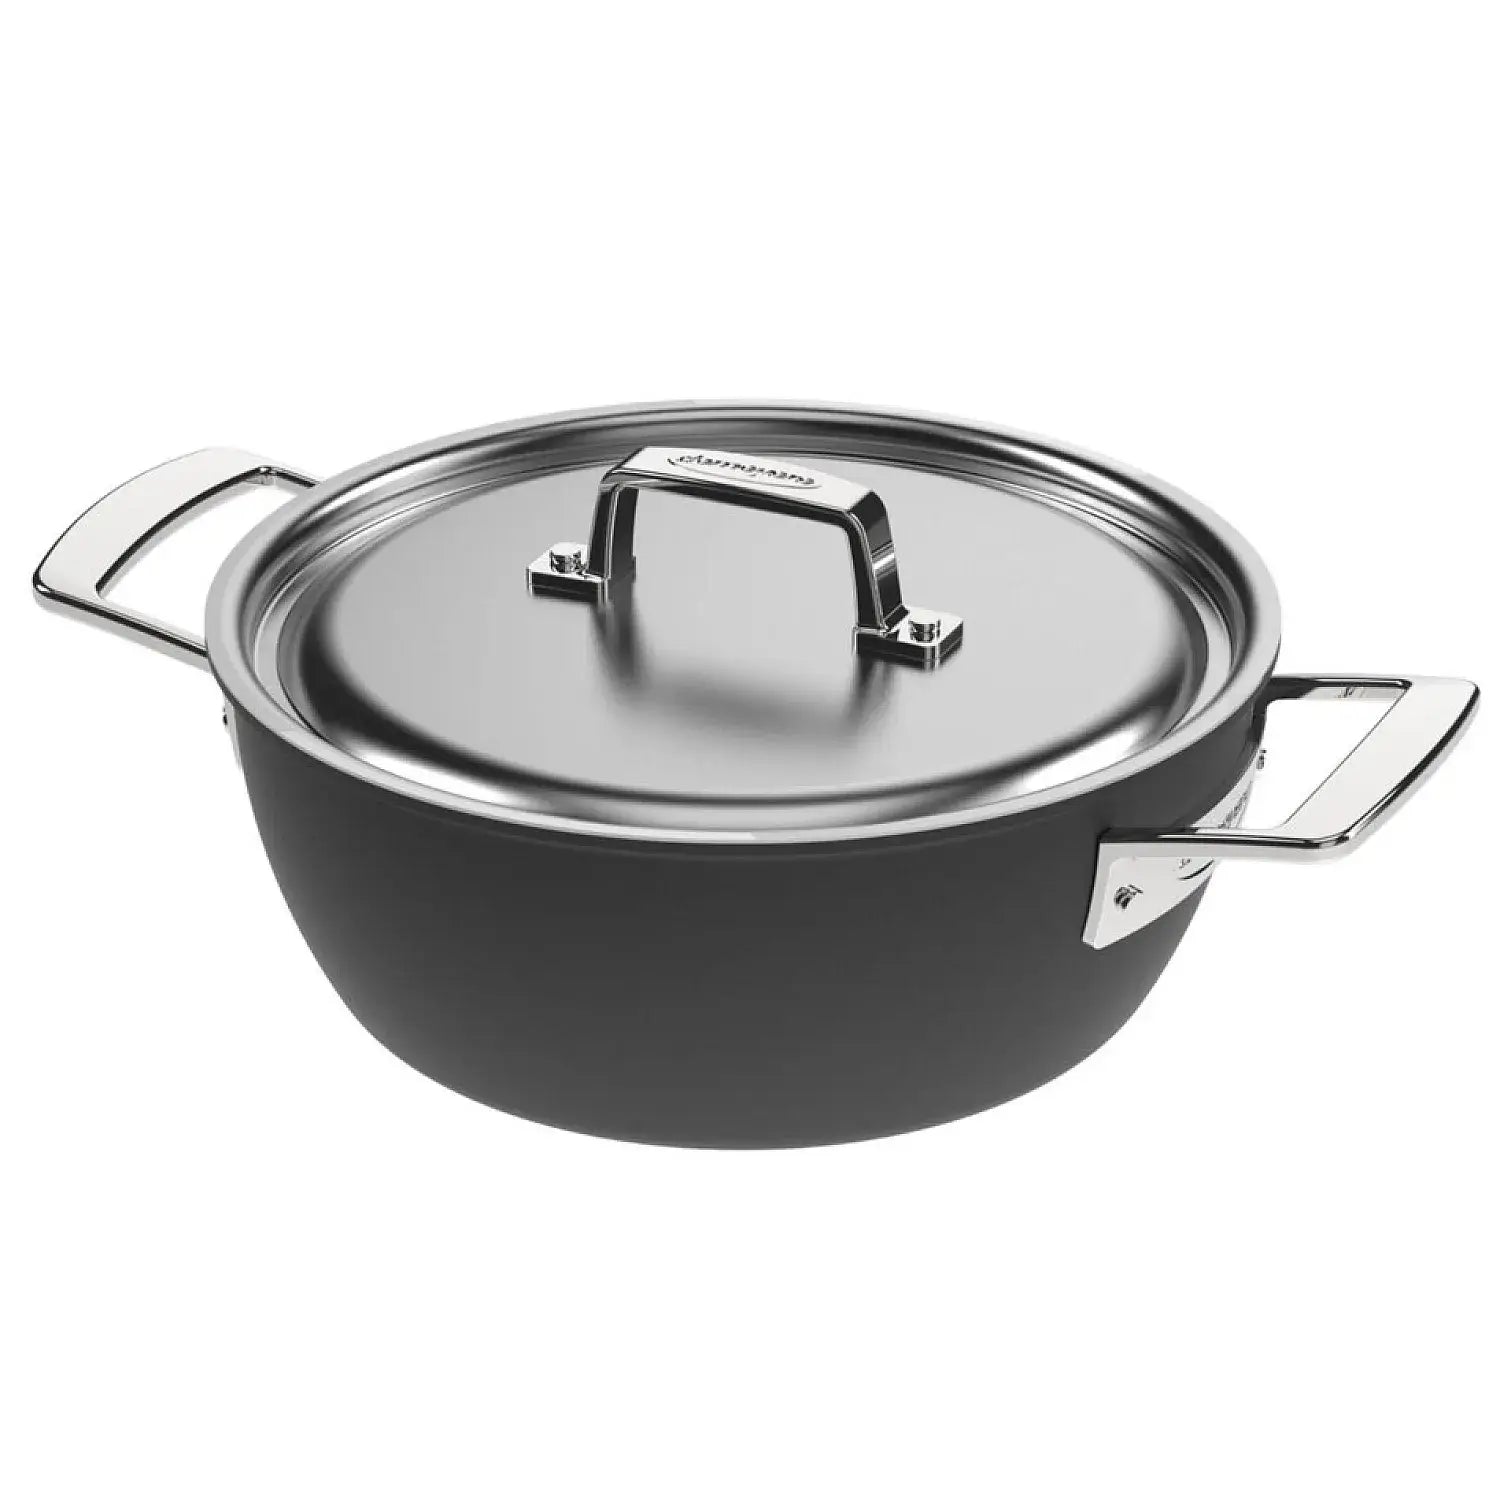 Demeyere Black 5 Dutch Oven with Lid